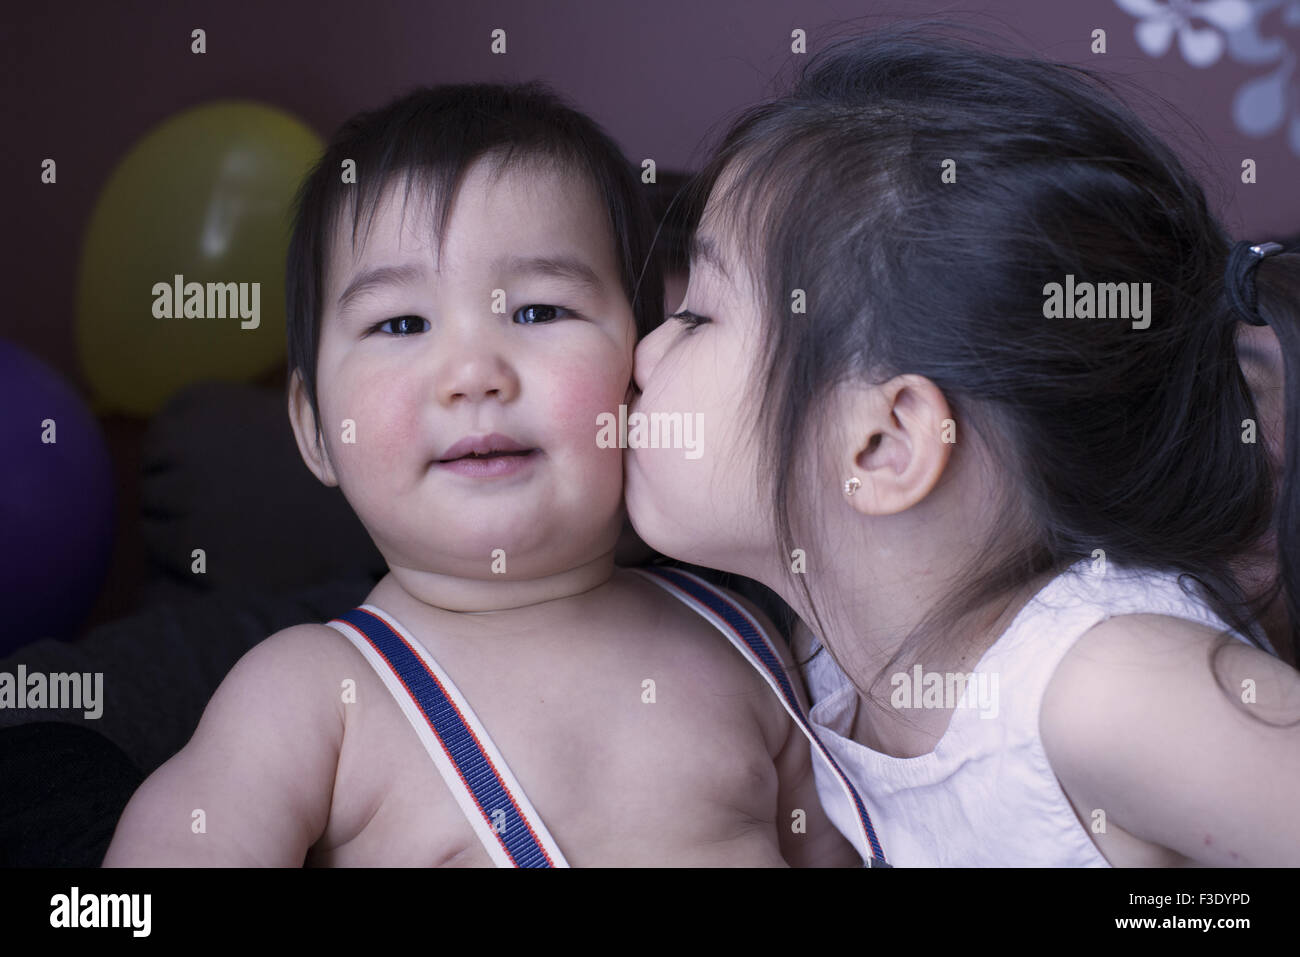 Little girl kissing baby brother on cheek, portrait Stock Photo